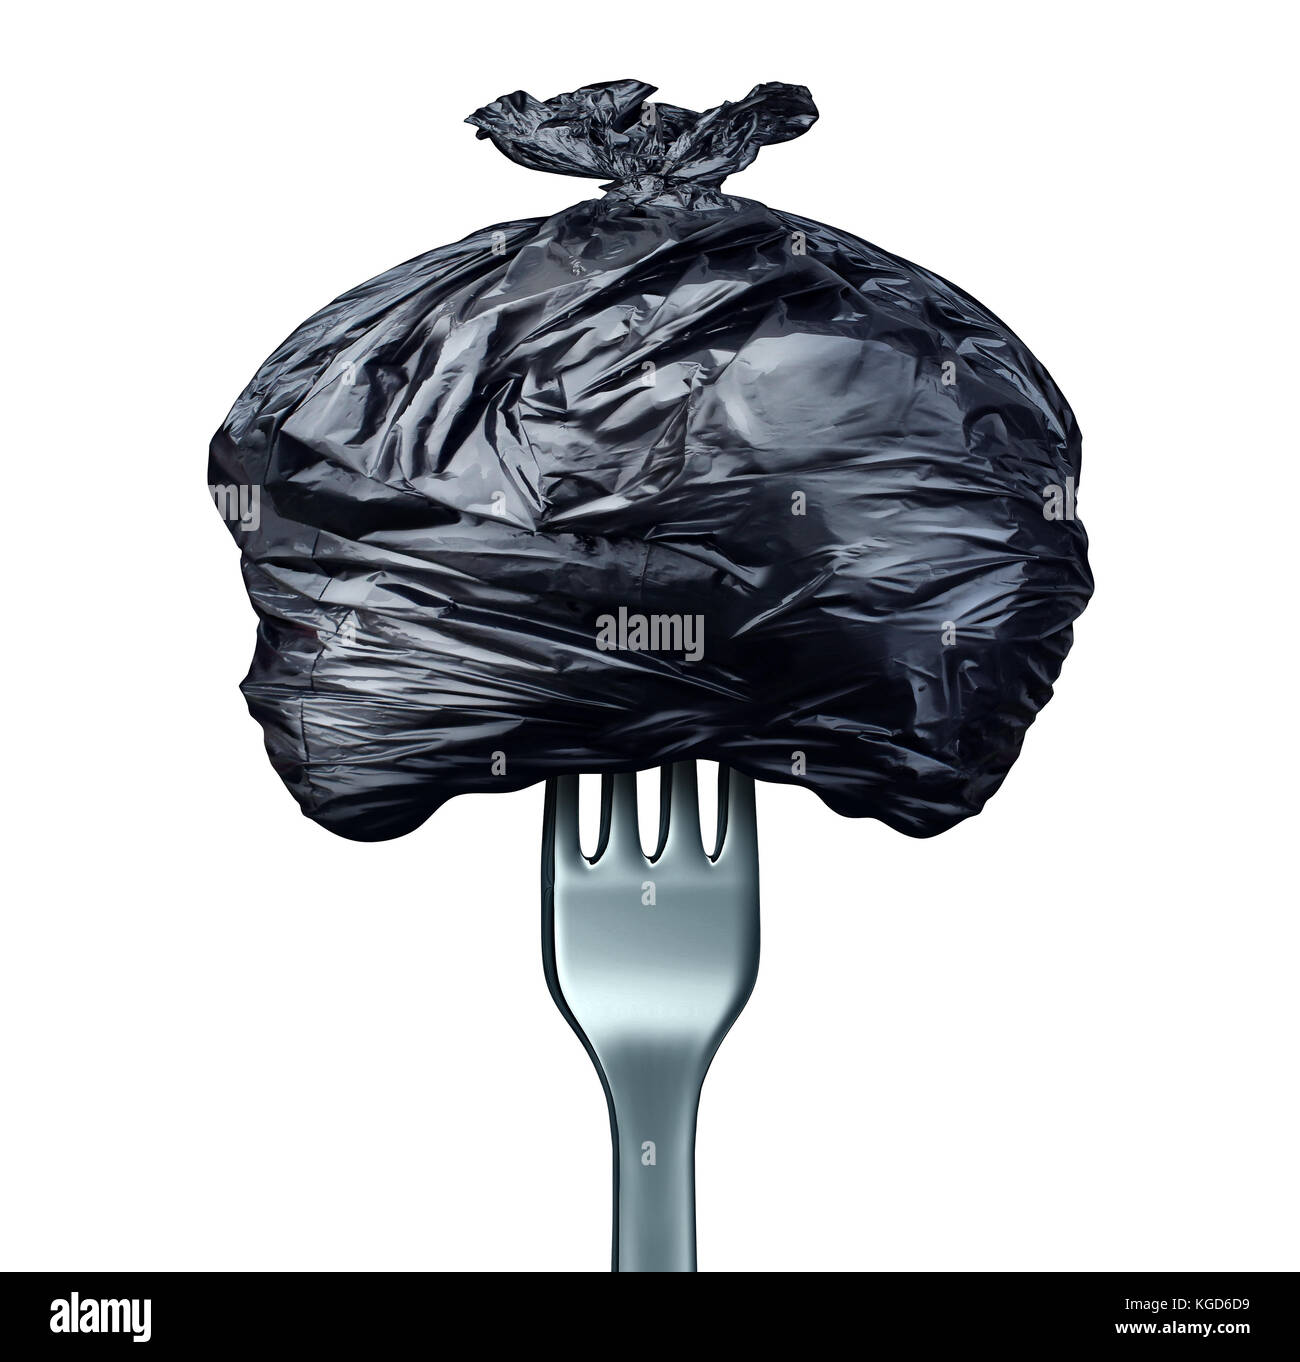 https://c8.alamy.com/comp/KGD6D9/eat-and-eating-garbage-and-junk-food-diet-symbol-as-a-fork-utensil-KGD6D9.jpg